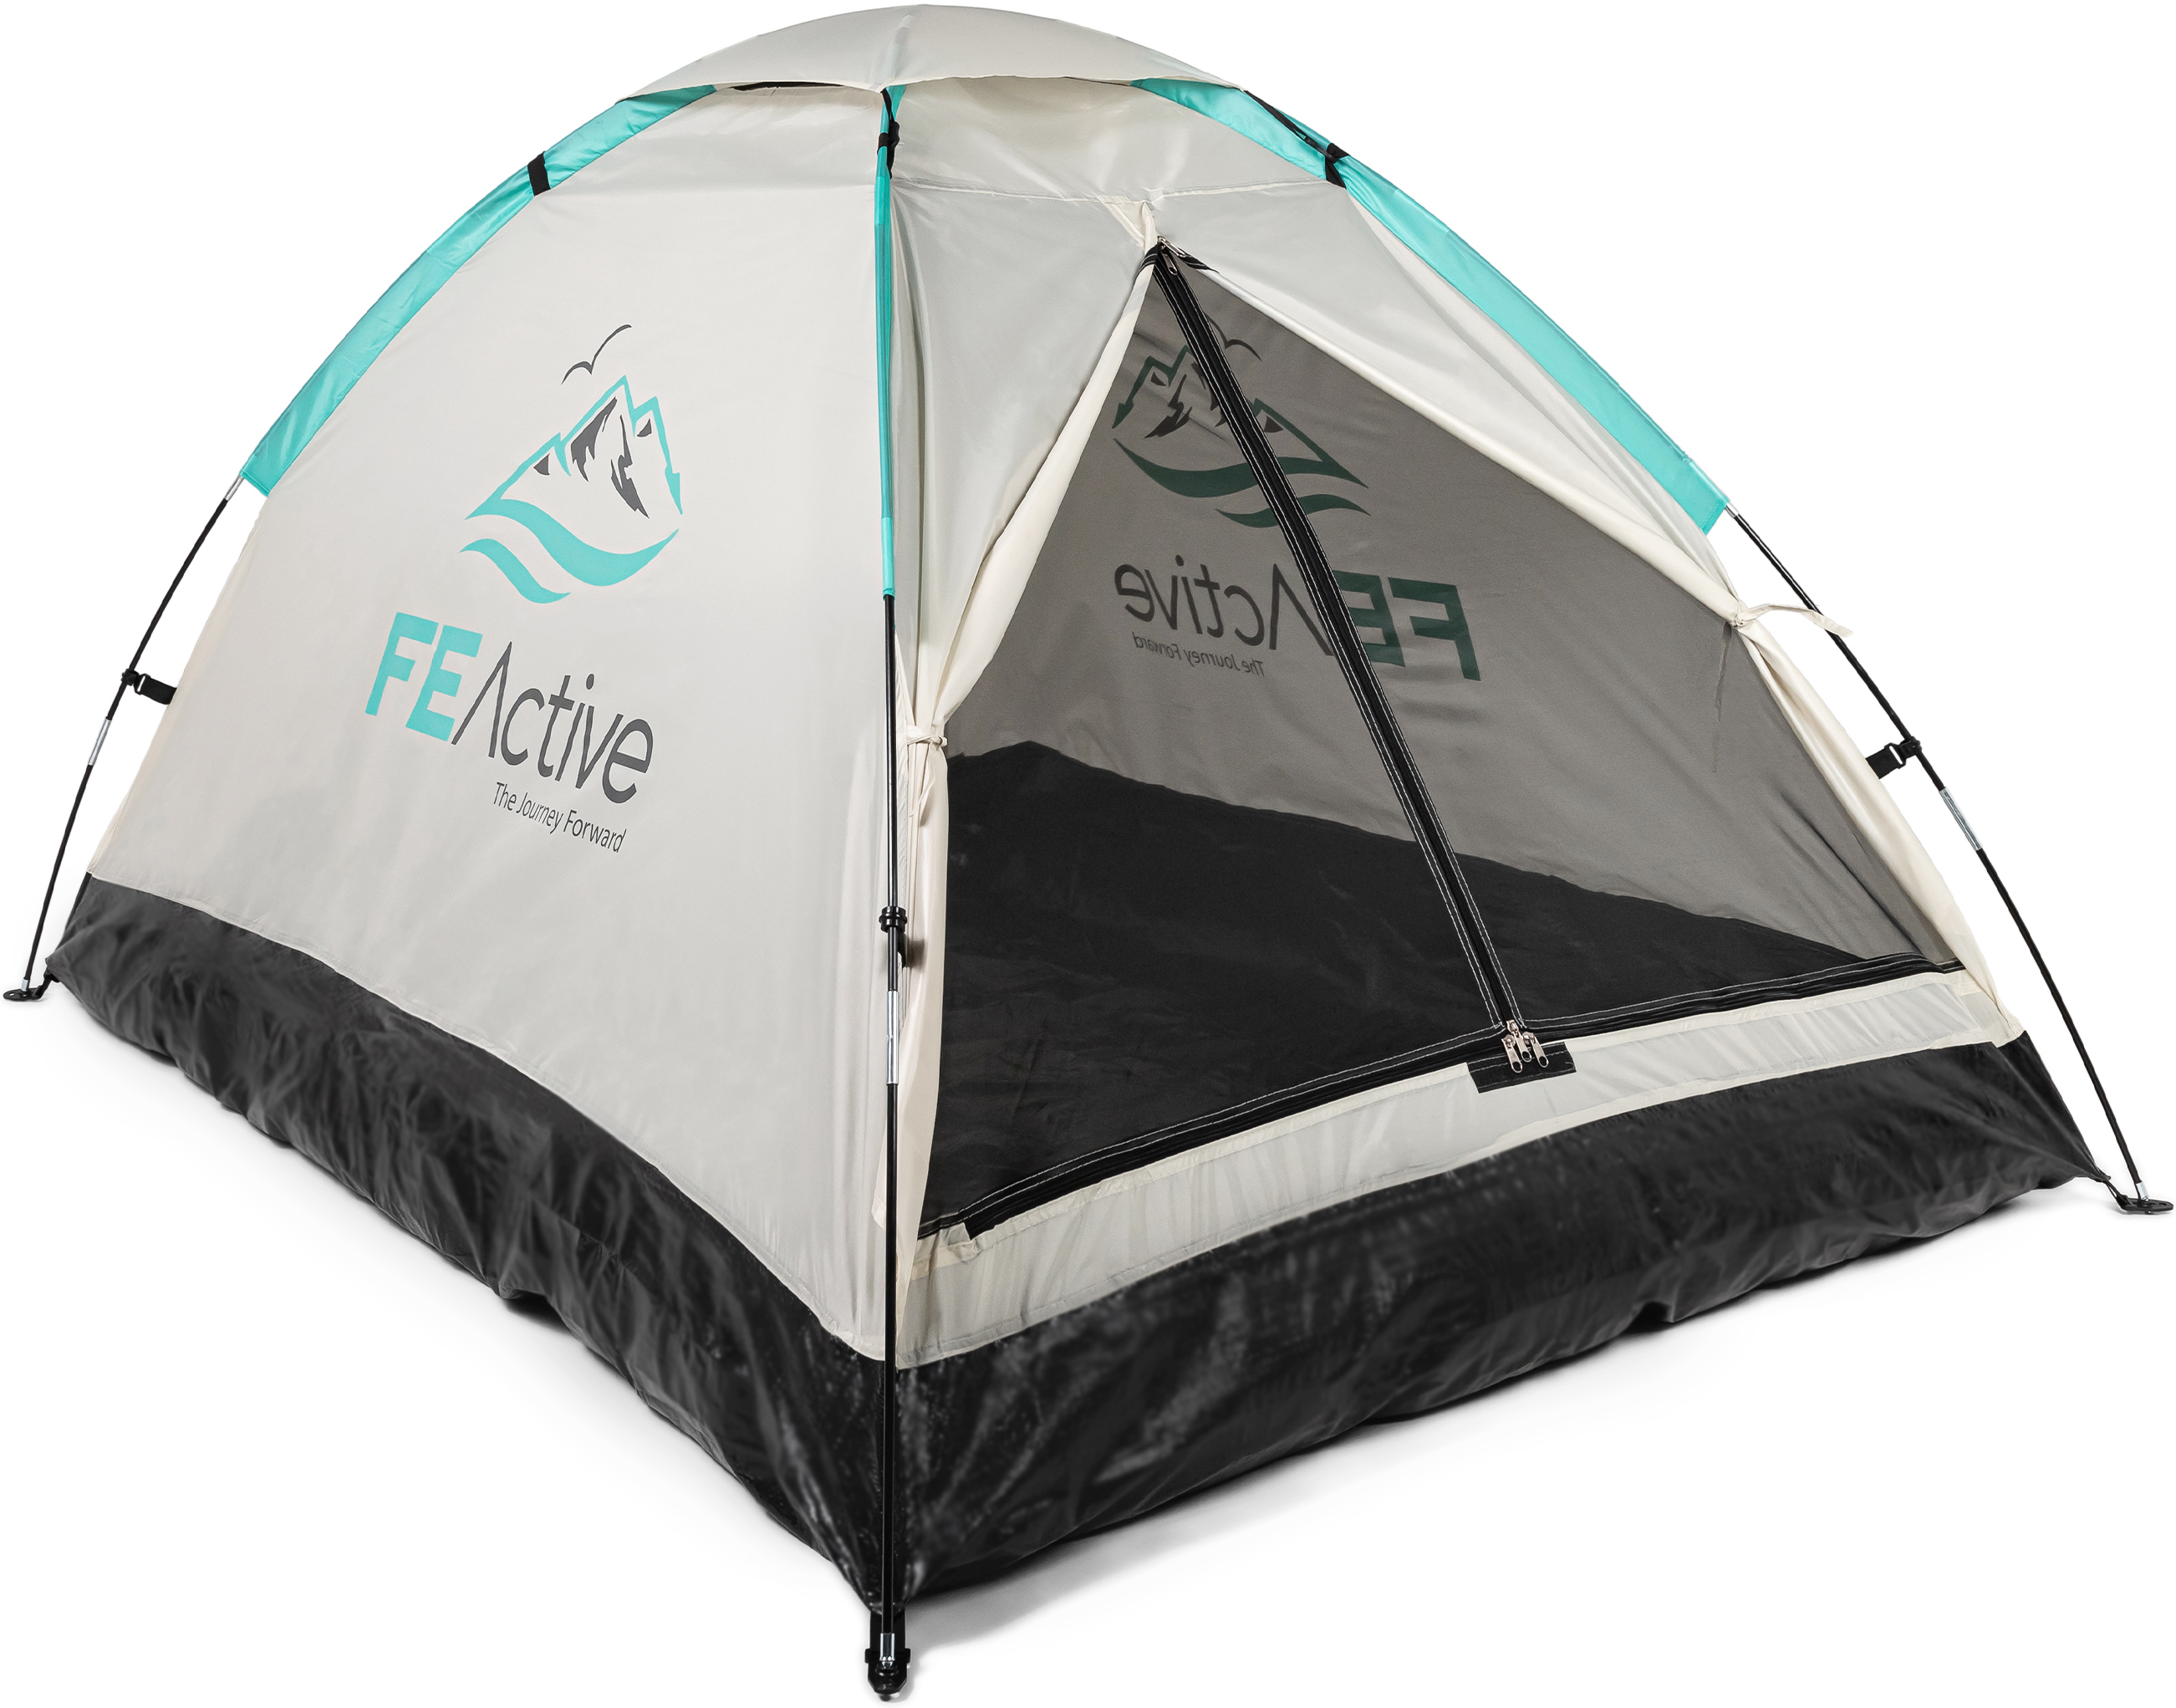 FE Active - 1 to 2 Person Tent with Screened Entrance and Easy Quick Setup That is Water Resistant for Outdoors， Camping， Backpacking， Hiking， Trekking | Designed in California， USA